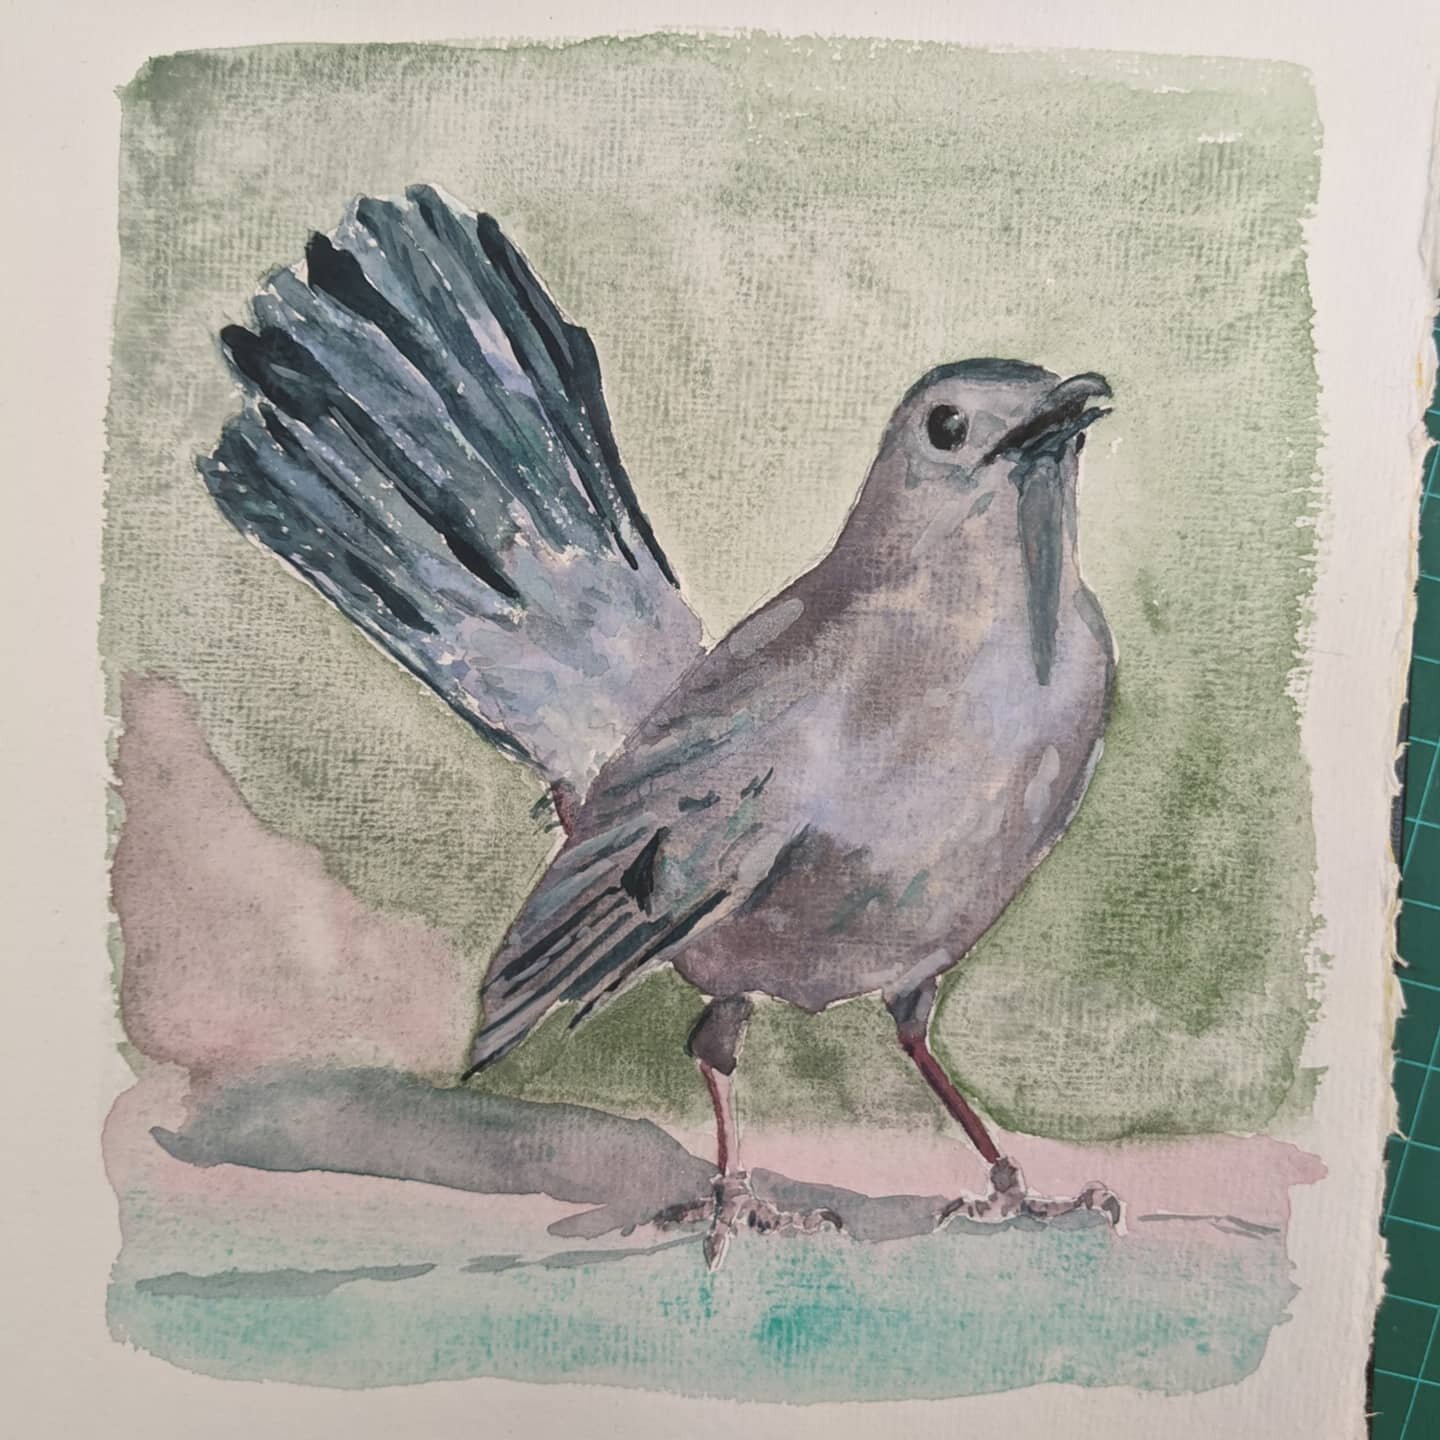 Grey catbird! Meow! 
Feathers are hard.
Watercolor, about 5&quot;x5&quot;
Gifted.

Watercolor painting of a grey catbird with a green background and grey-pink-teal shadow.

#catbird #meow #meowbird #greybird #watercolor #beampaints  #beampaintstones 